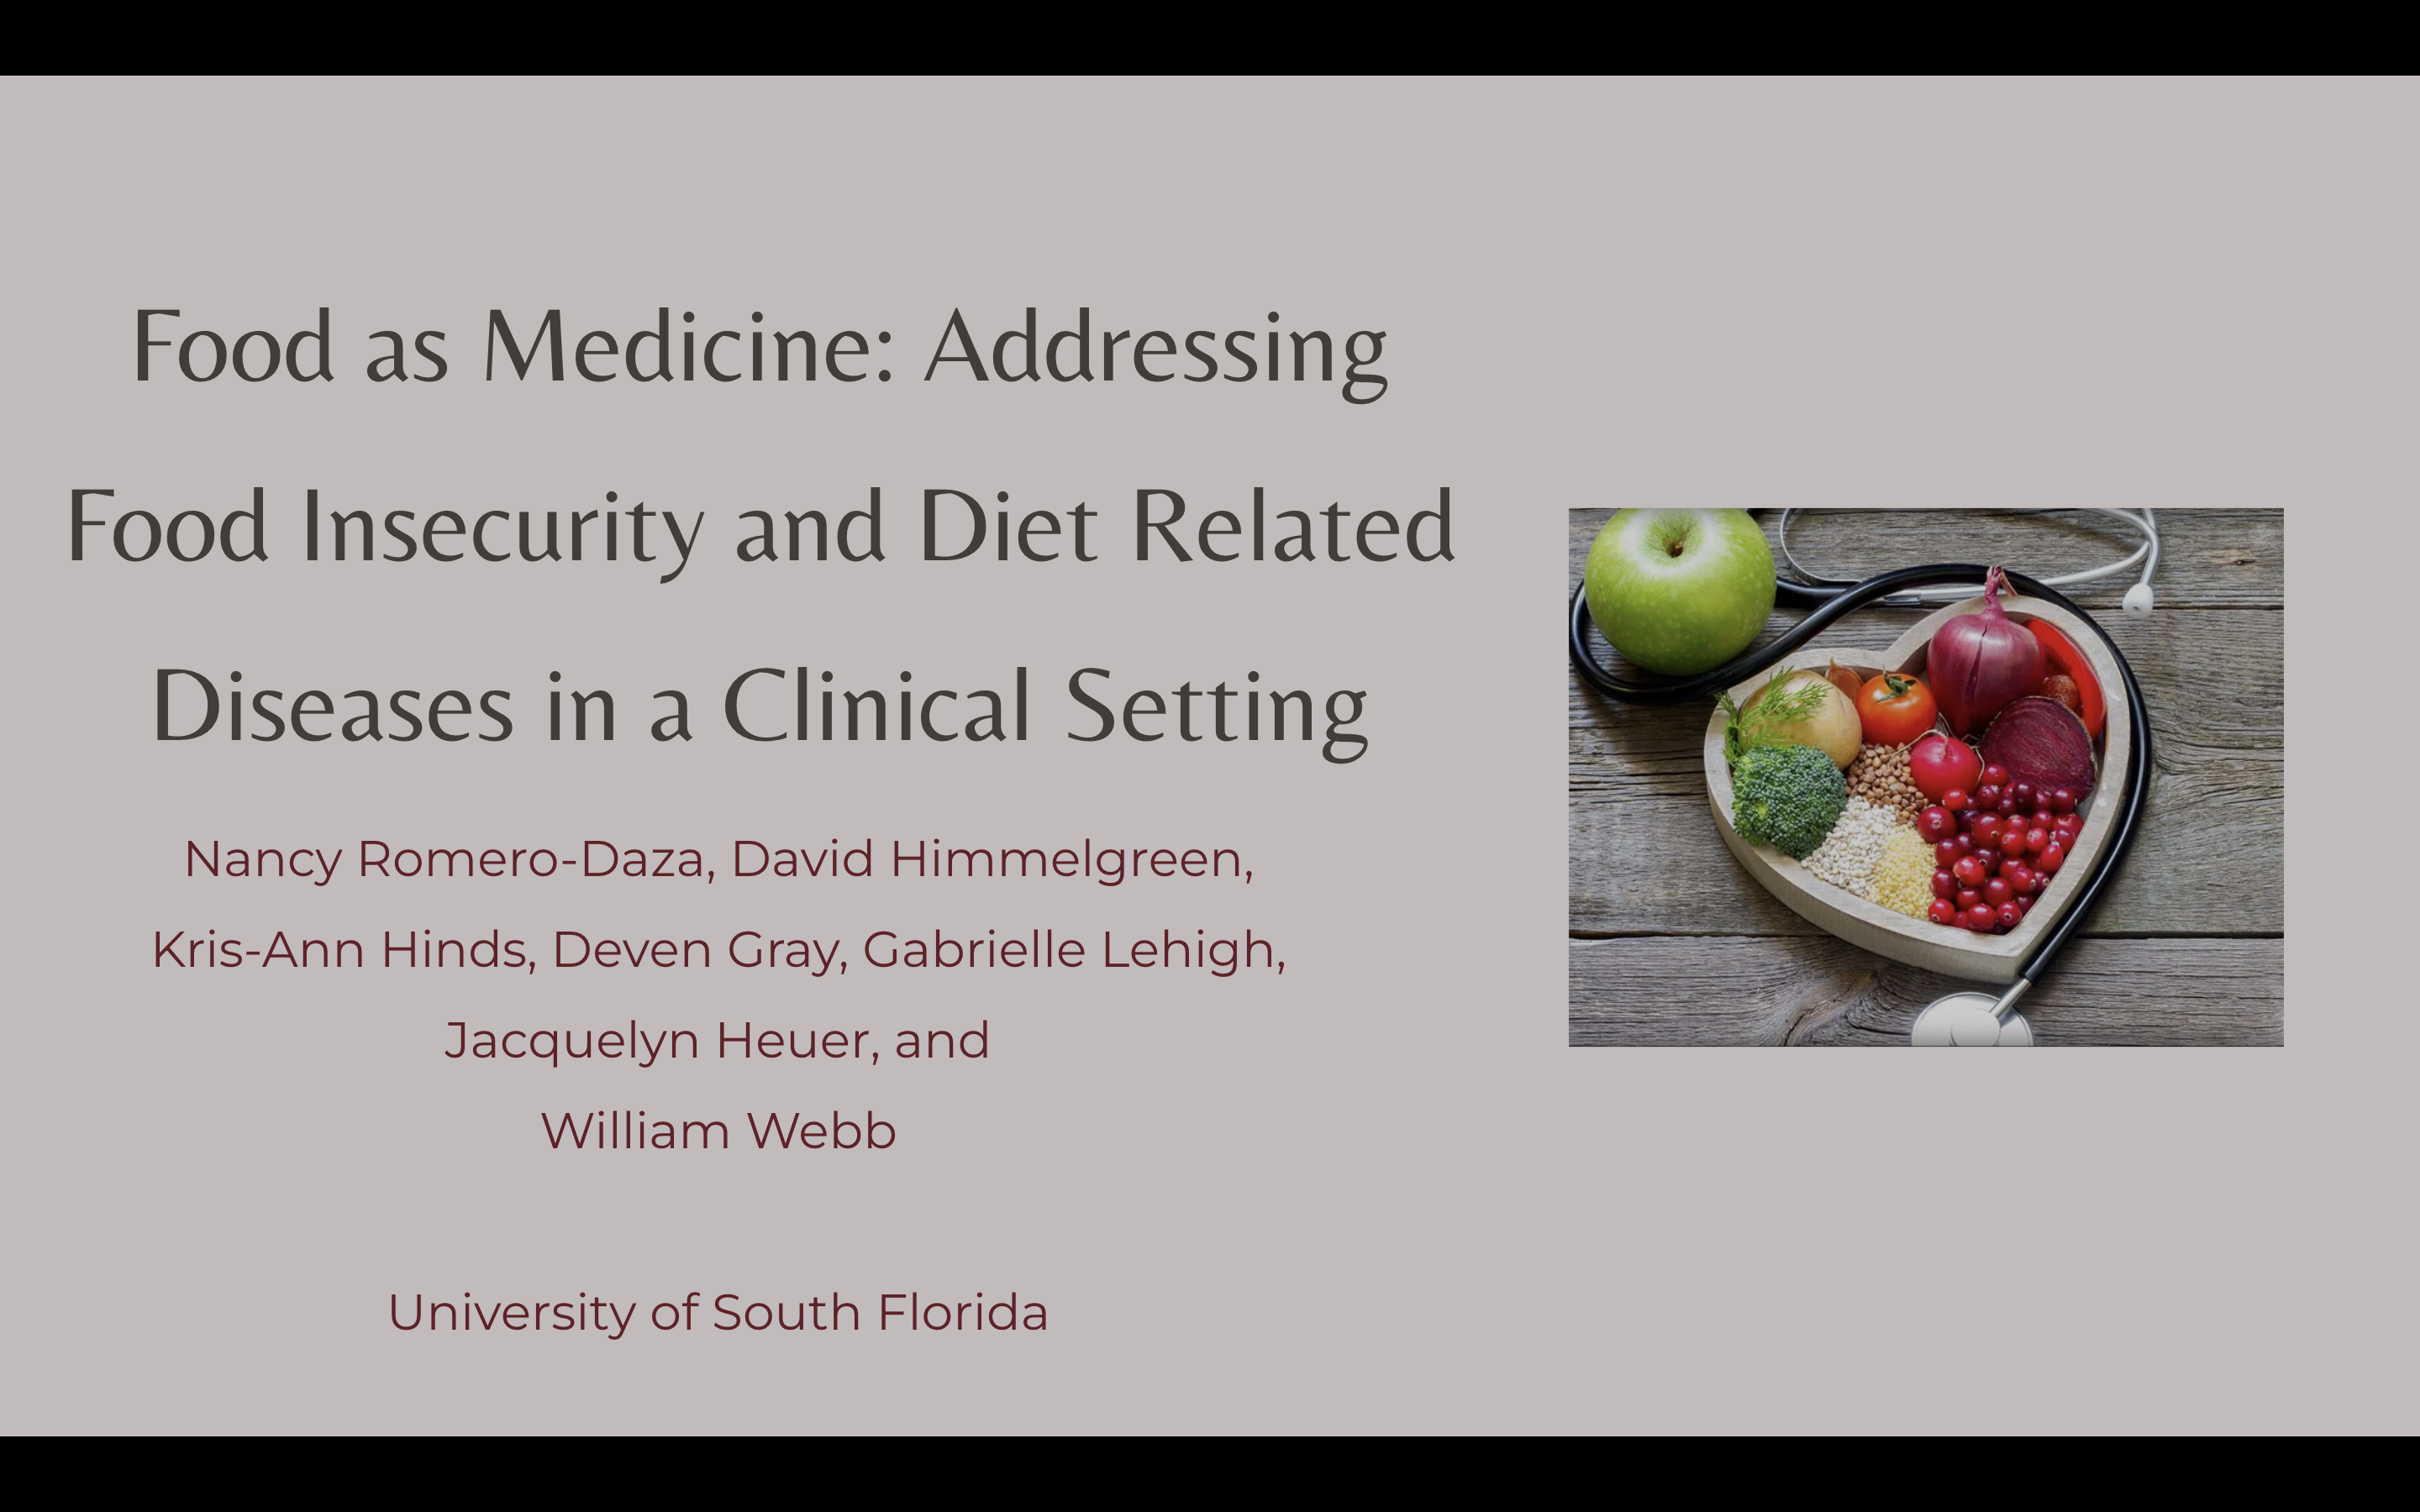 Food as Medicine: Addressing Food Insecurity and Diet Related Diseases in a Clinical Setting by Nancy Romero-Daza, David Himmelgreen,  Kris-Ann Hinds, Deven Gray, Gabrielle Lehigh, Jacquelyn Heuer, and  William Webb  University of South Florida